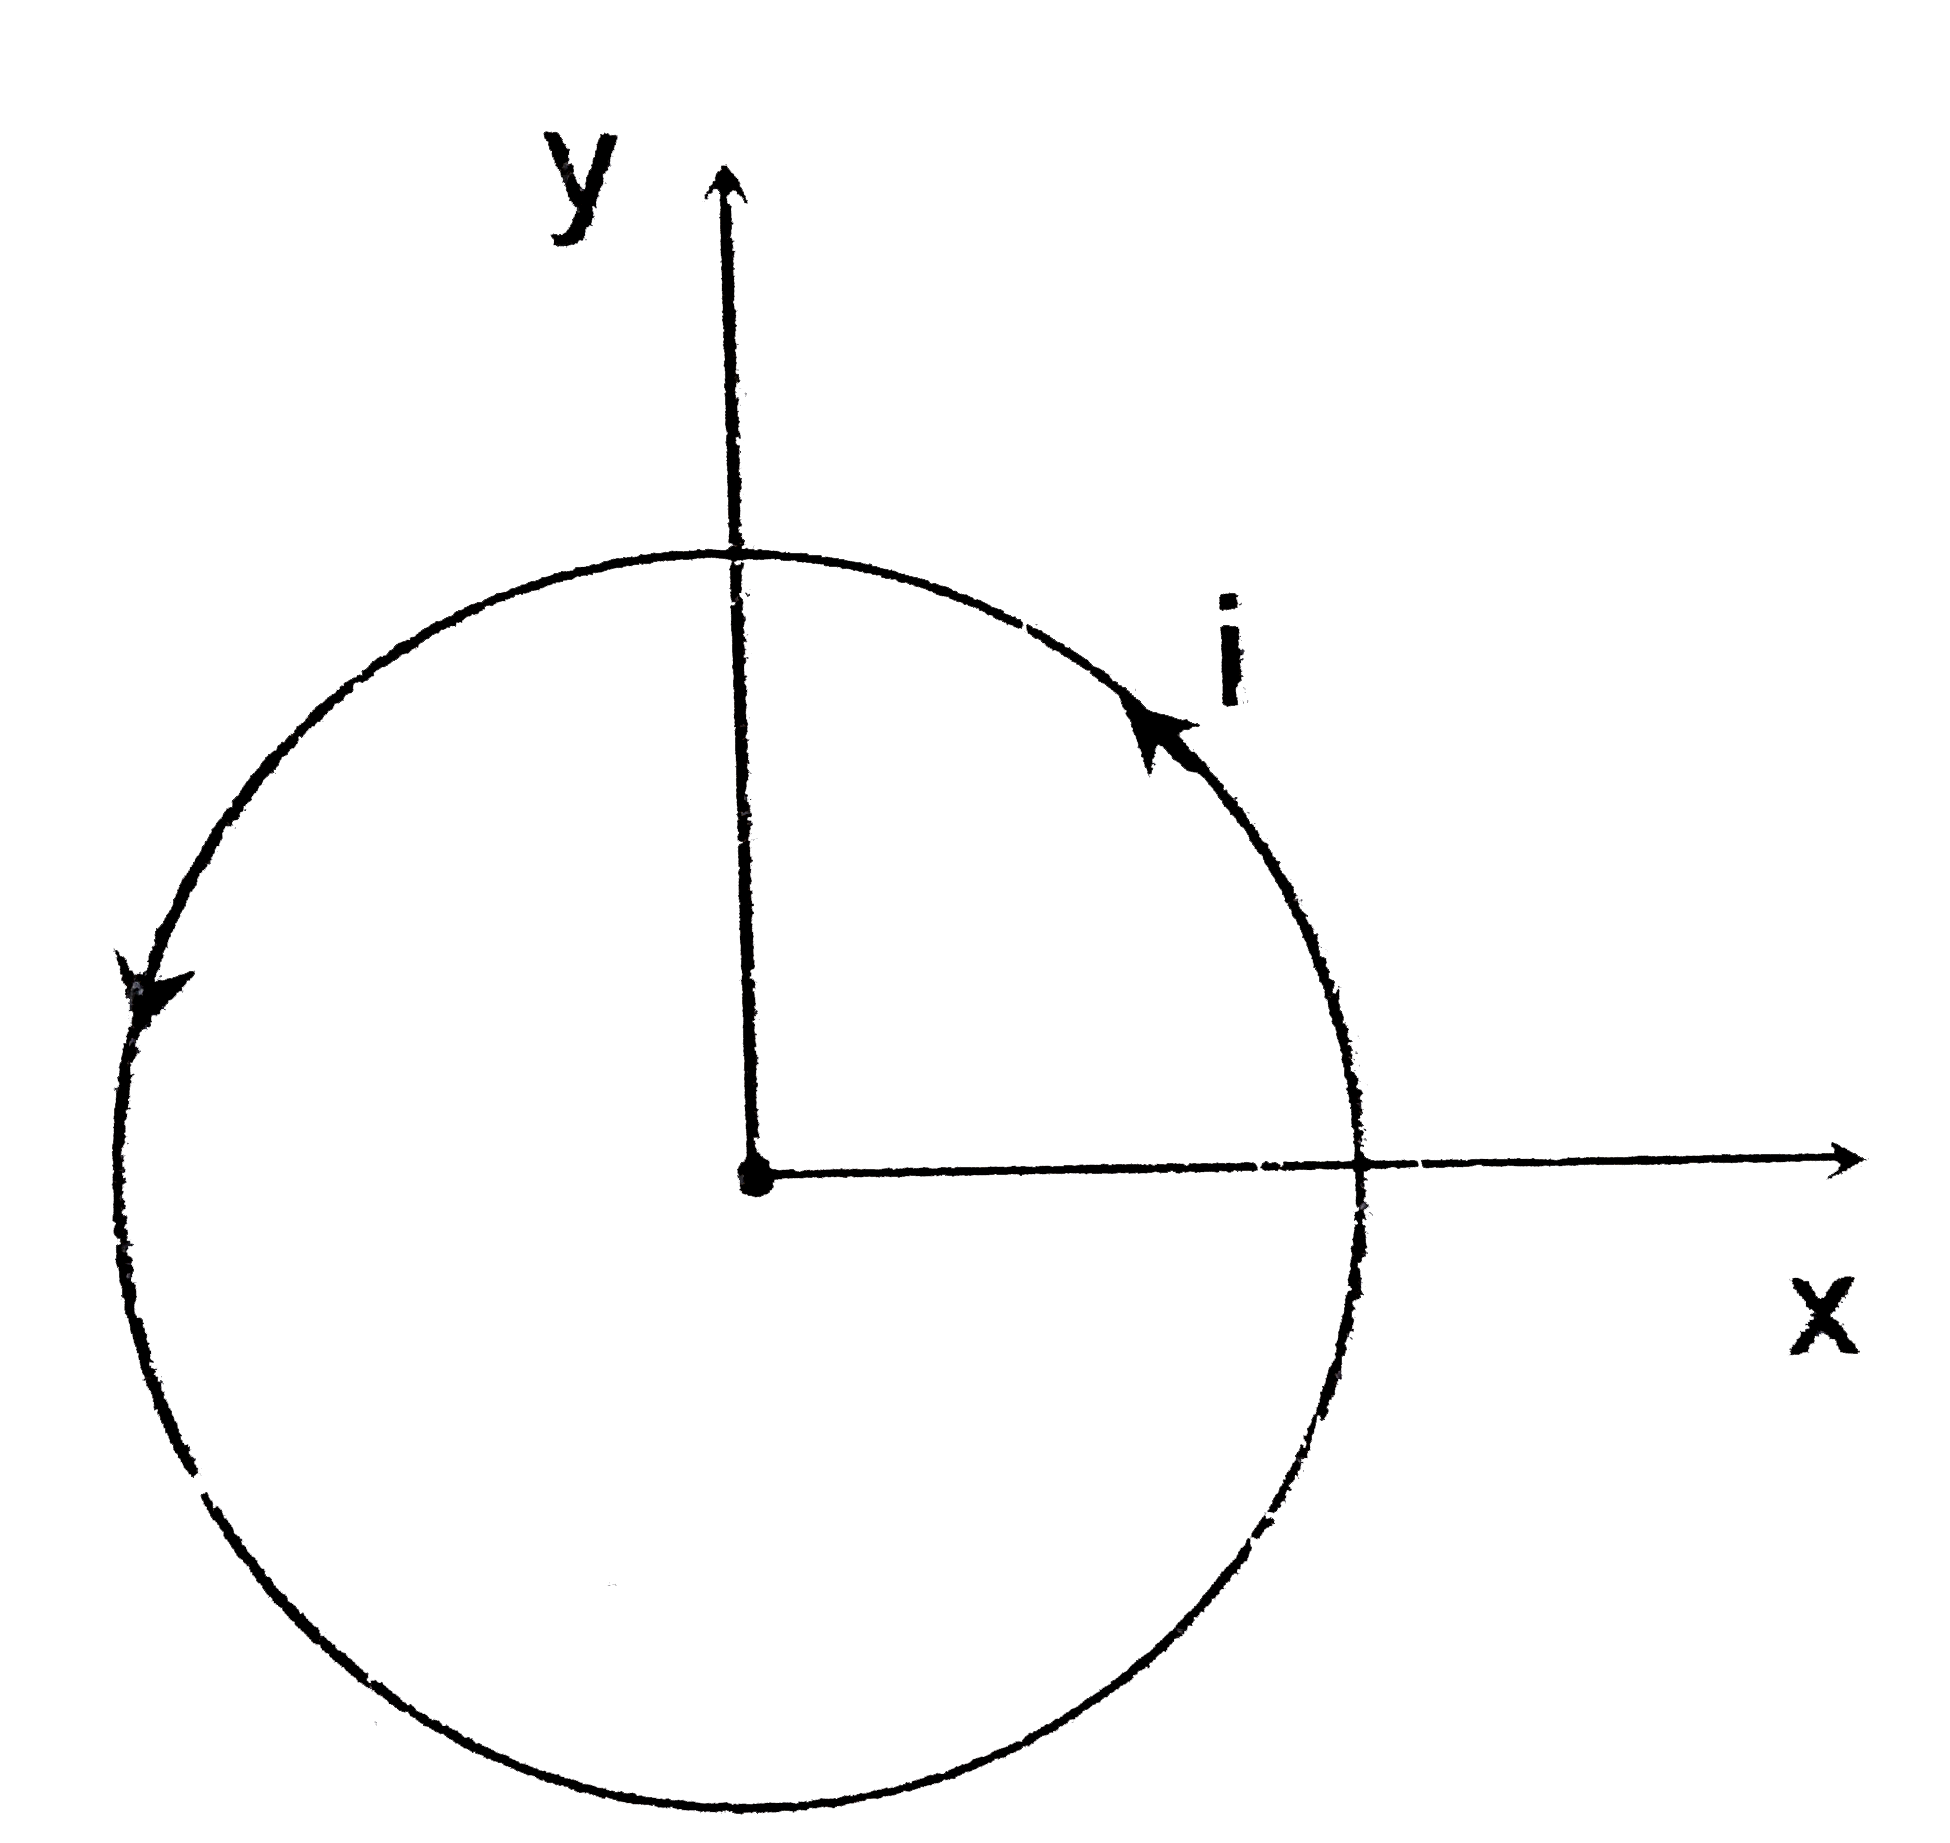 Magnetic field in a space is given as B = -(B(o)x)/(R )hat(k). A circular ring of radius R having current I lies in the space with centre at origin as shown in the figure. Find the magnitude of net magnetic force acting on the circular ring due to the magnetic field.